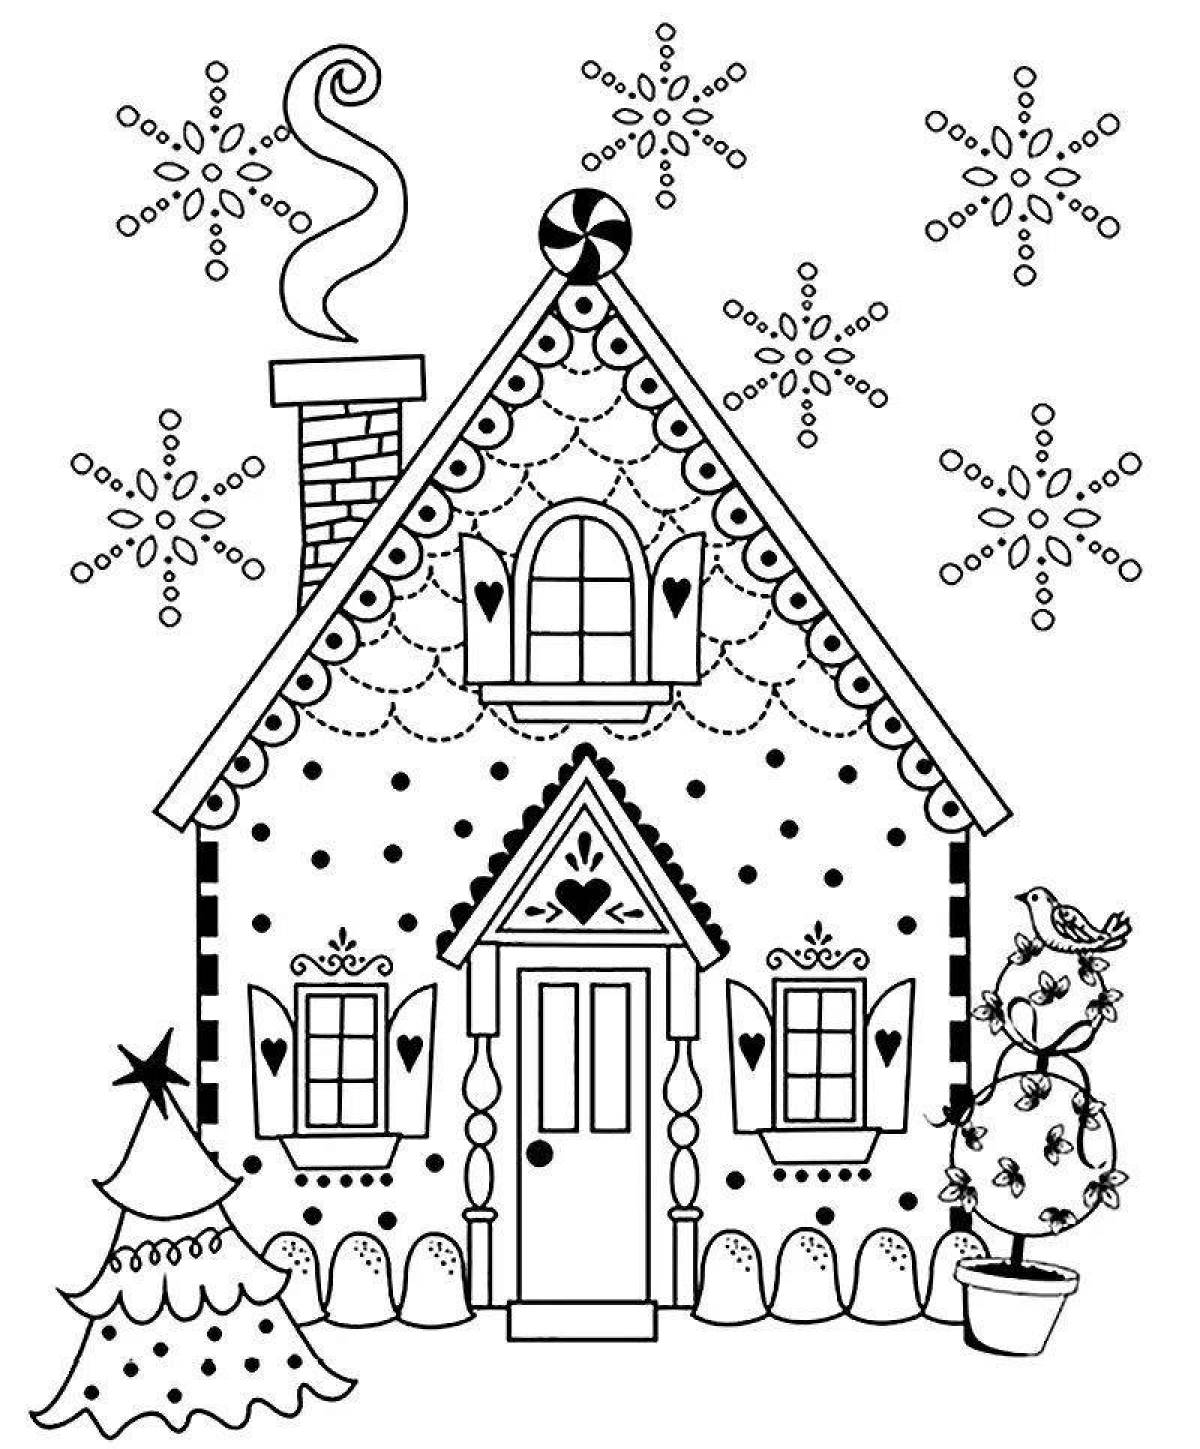 Colouring a magnificent Christmas house